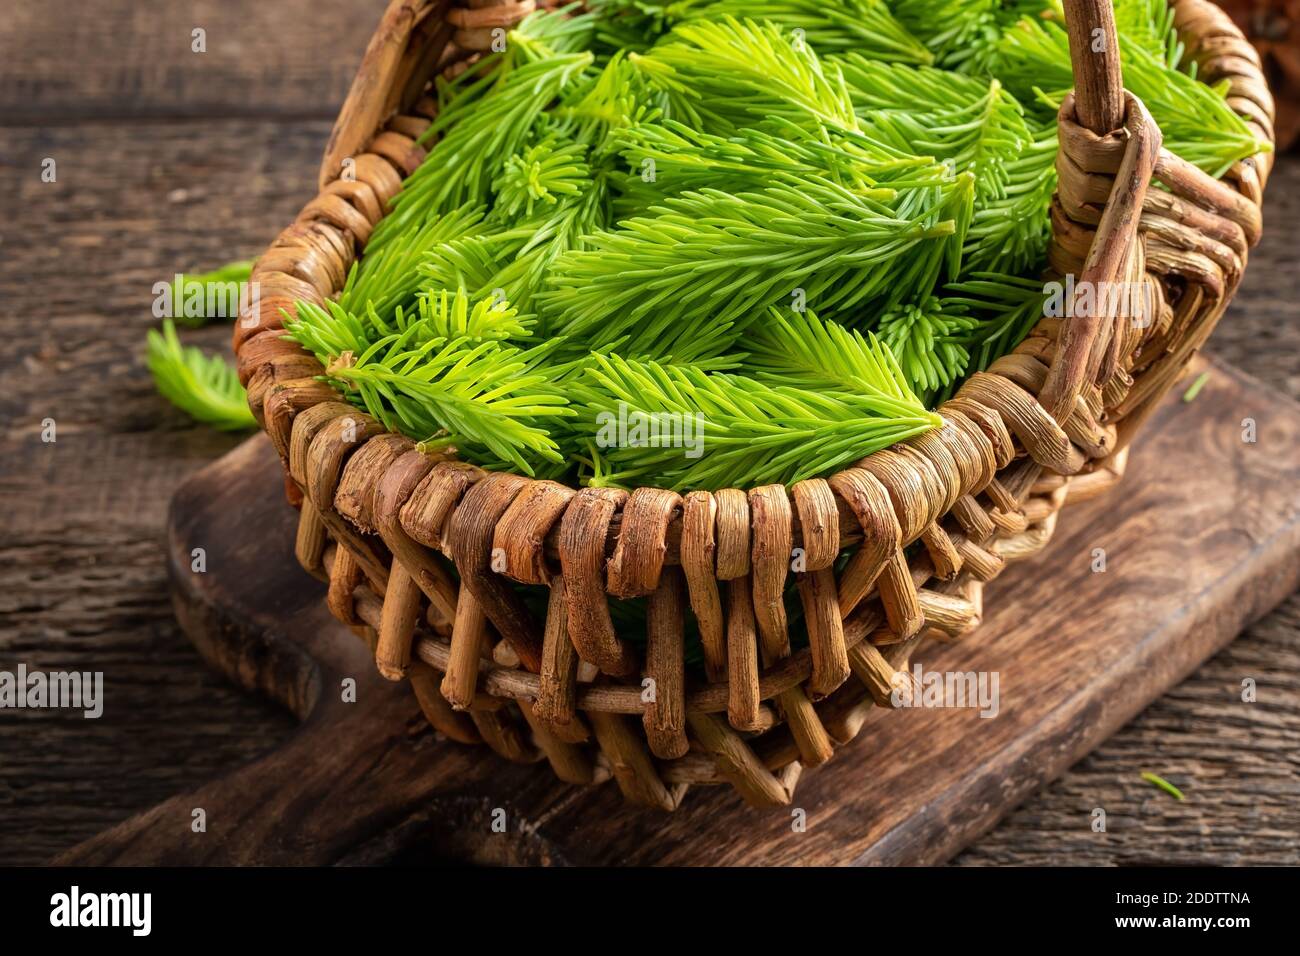 Young spruce tips in a basket, collected to prepare herbal syrup Stock Photo